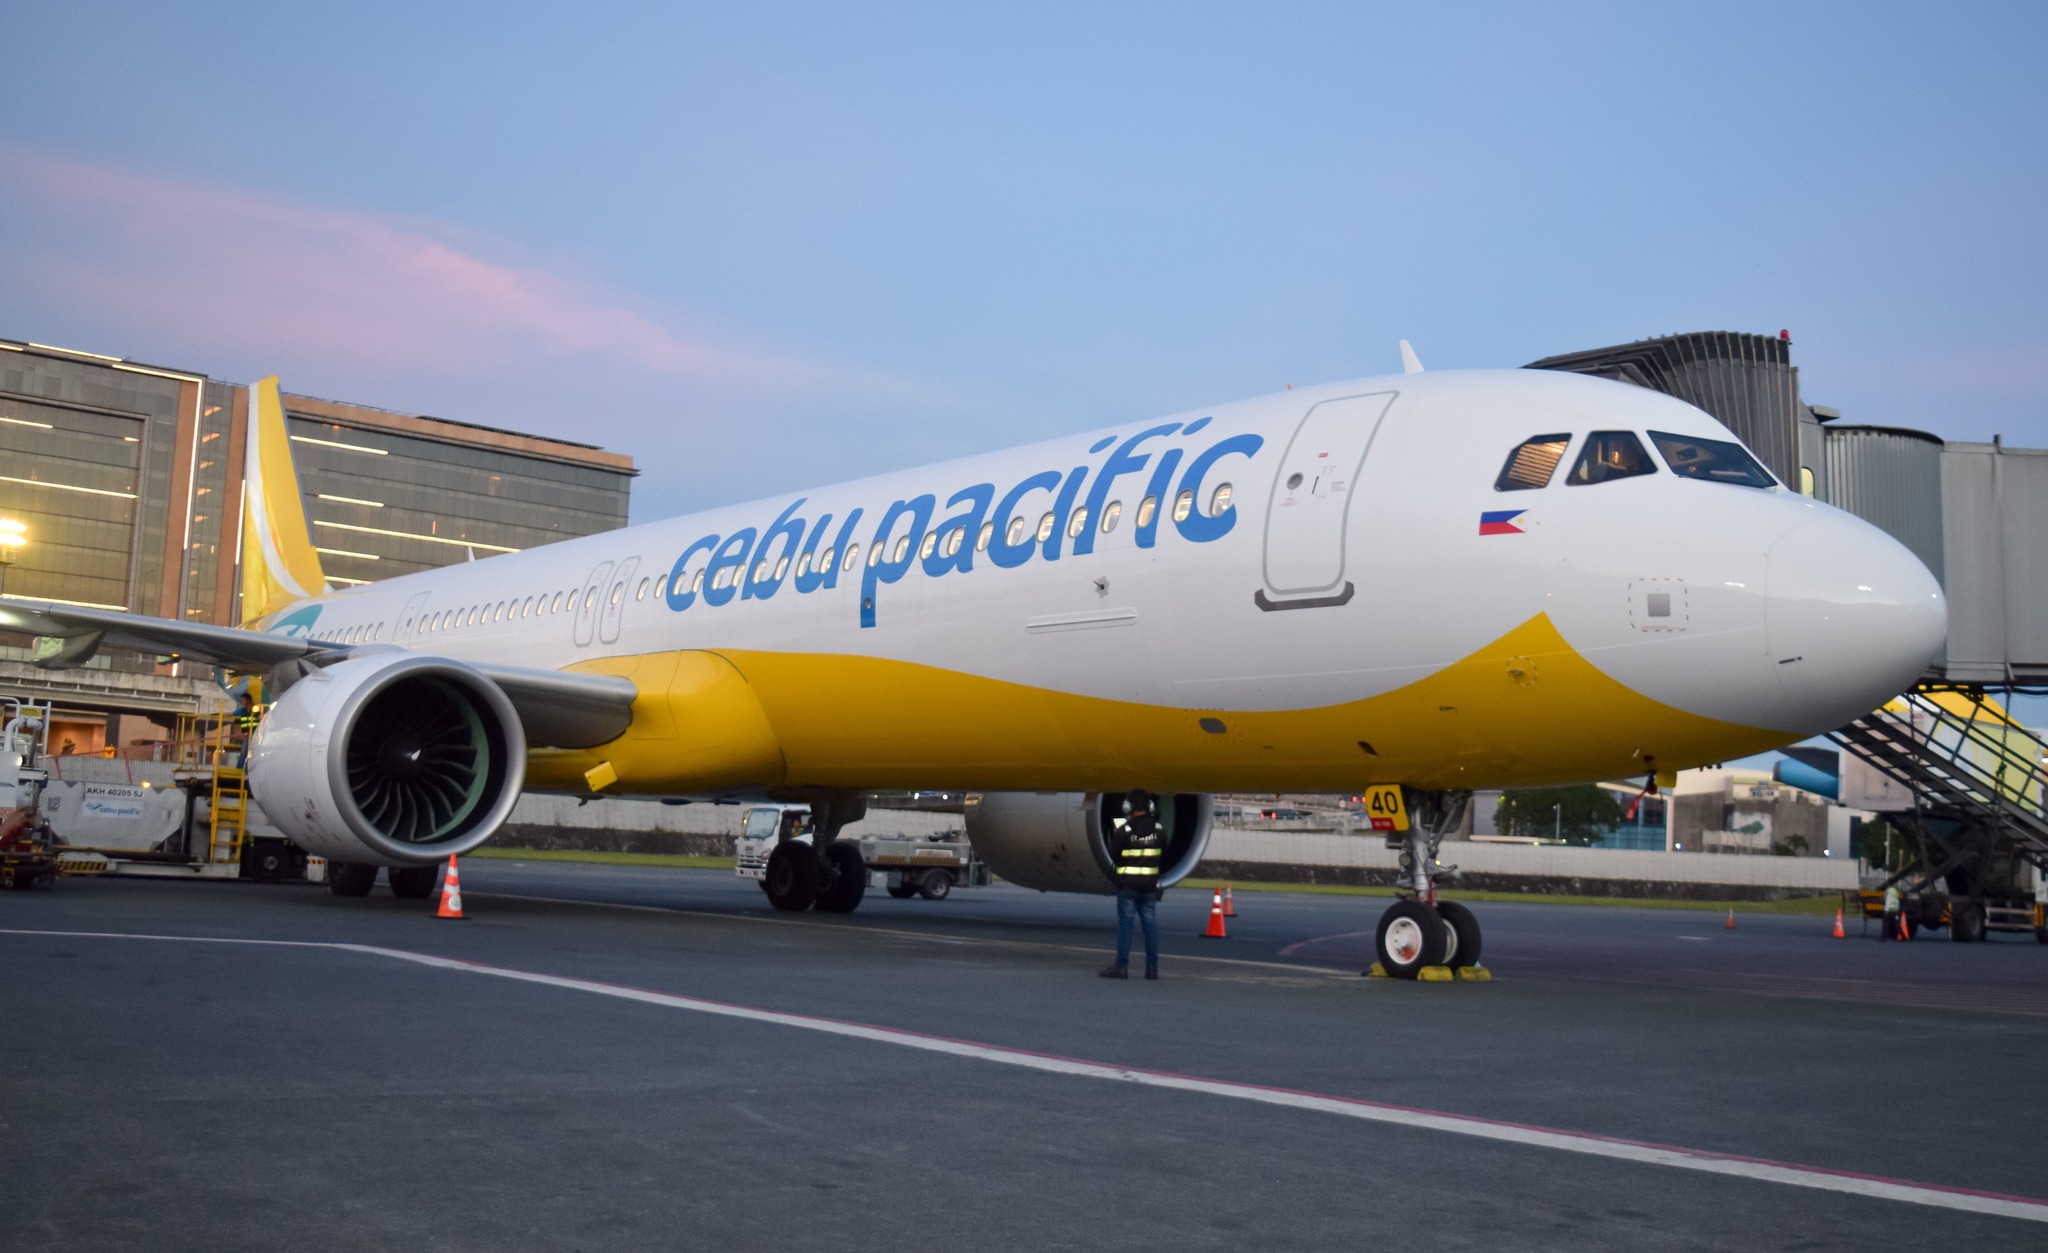 Cebu Pacific Is Adding More Aircrafts to Its Fleet, Introduces New Flight Destination